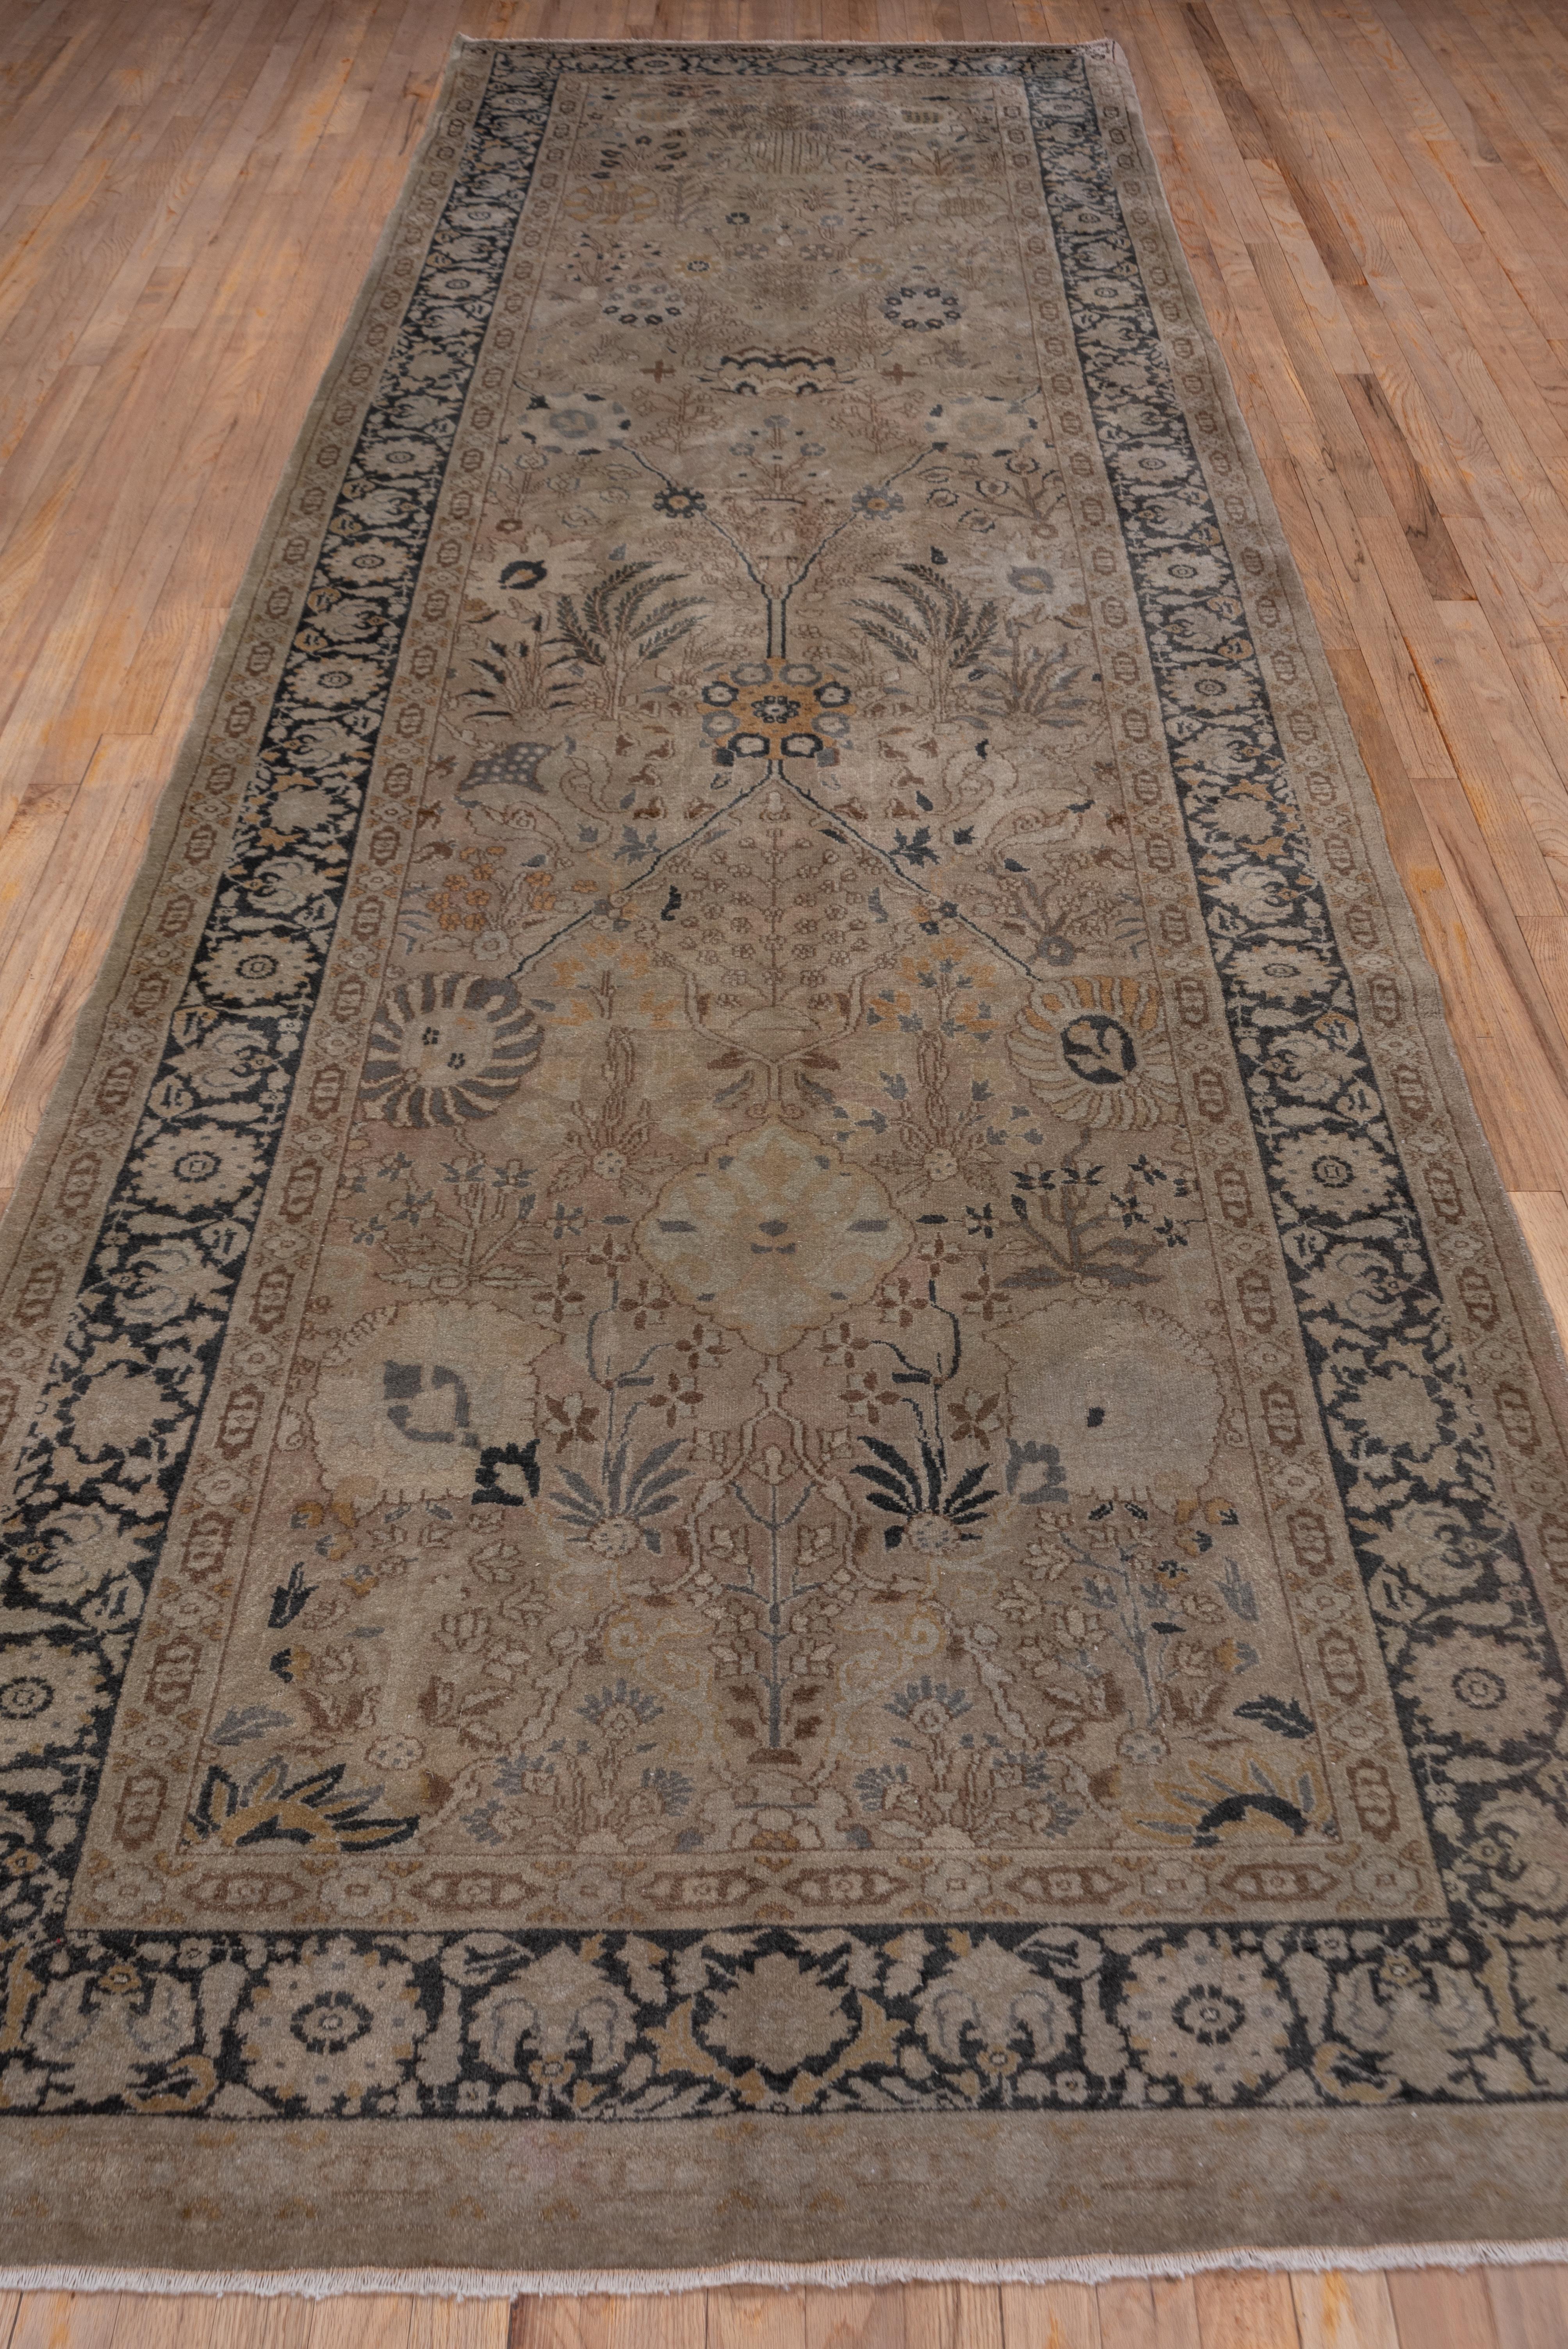 This northern Indian workshop gallery carpet has taken a vertical section of the famed 